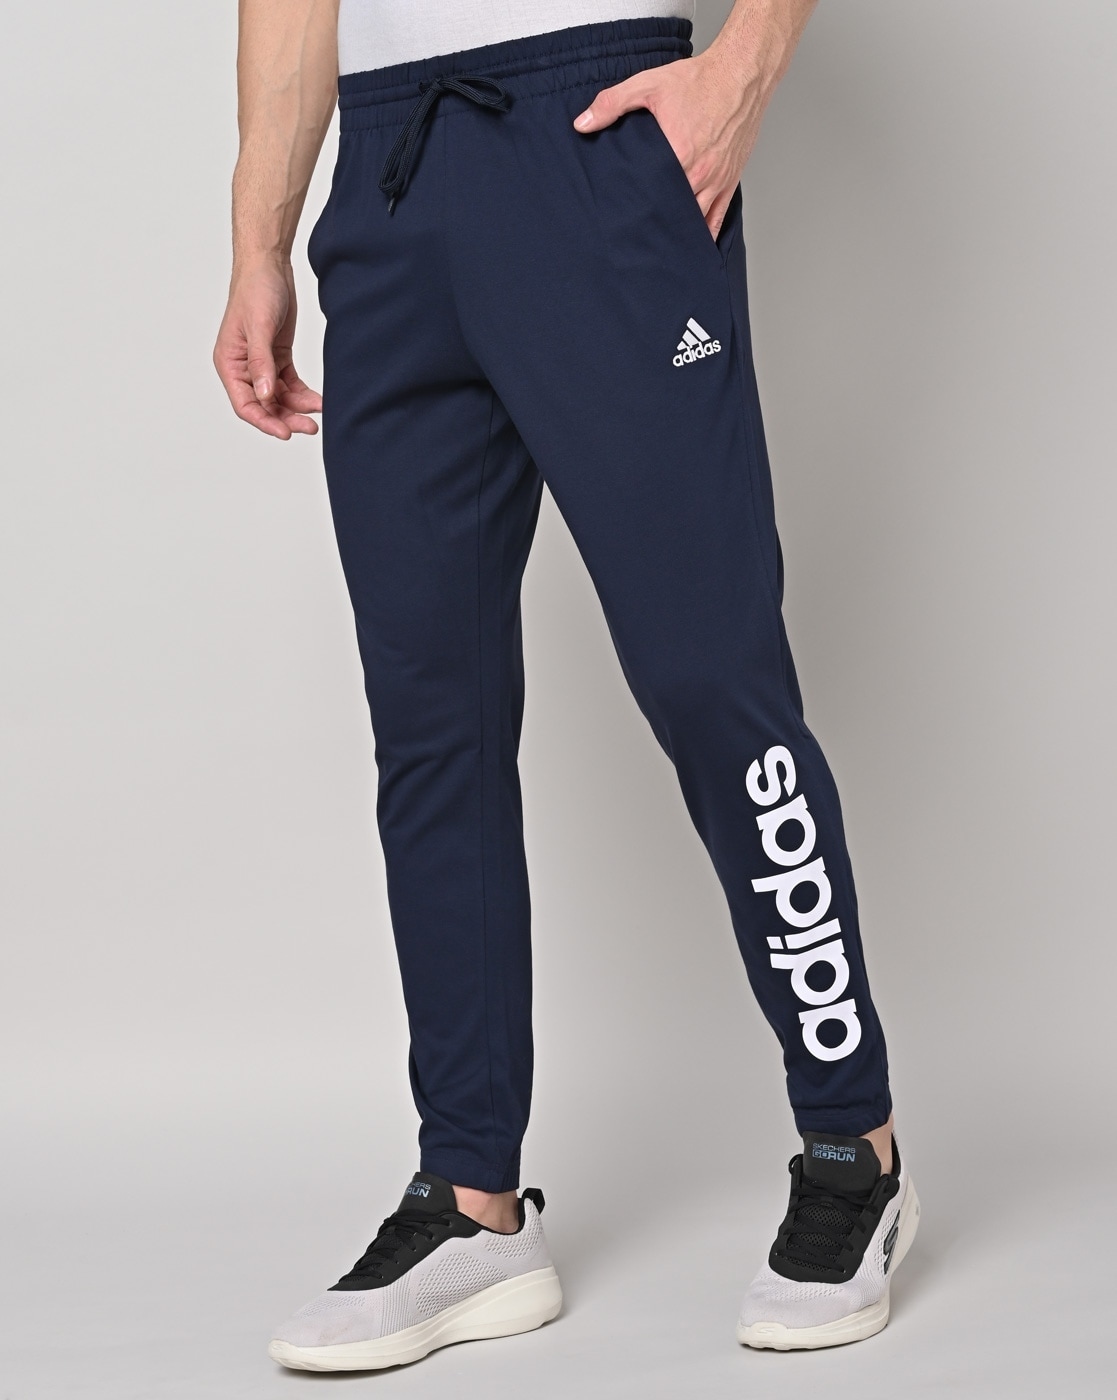 Buy Adidas men sportswear fit outdoor sweatpants lime green Online | Brands  For Less